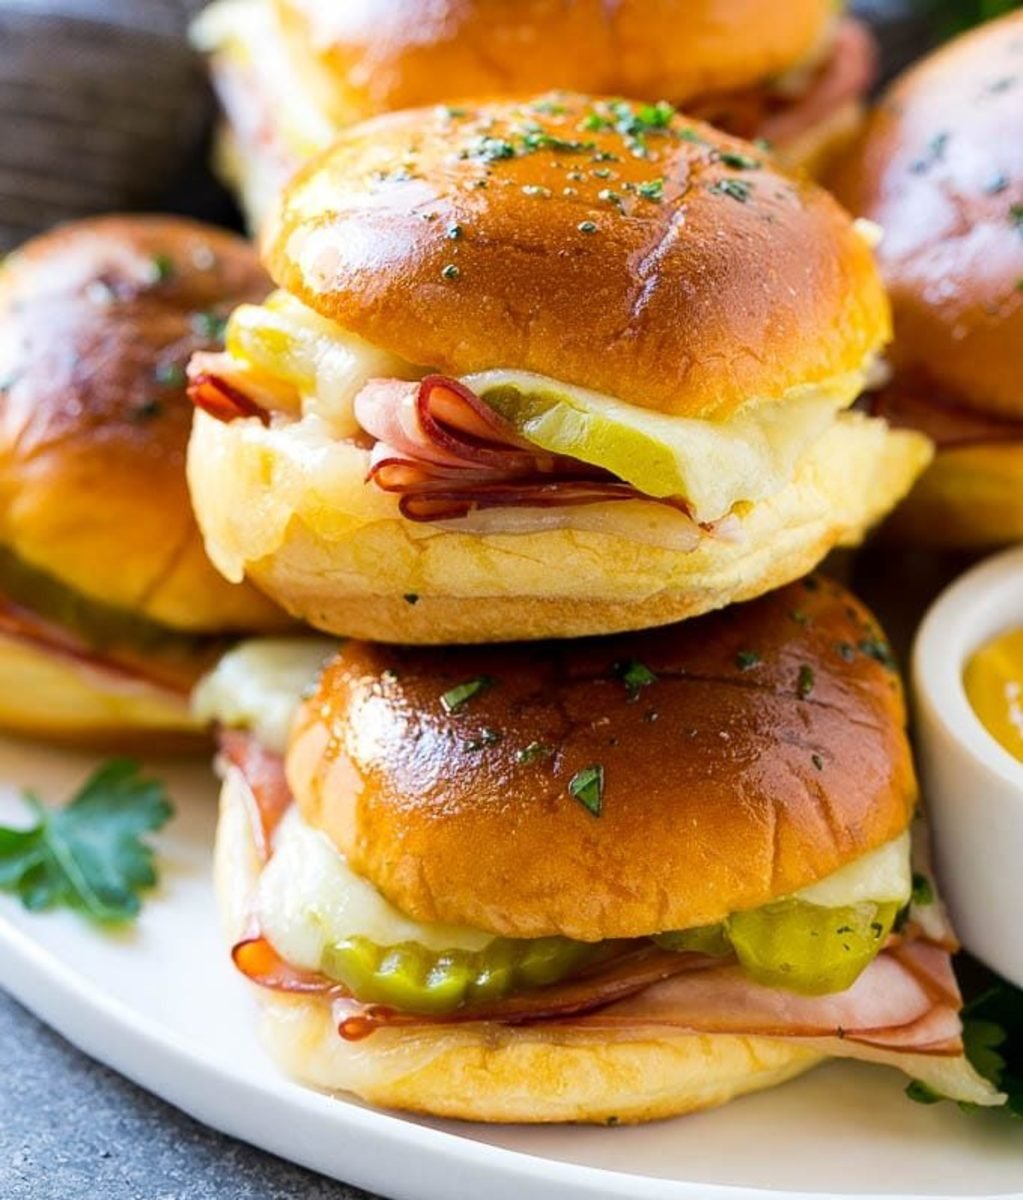 12 Simple Sheet Pan Slider Recipes For No-Fuss Yum On Game Day